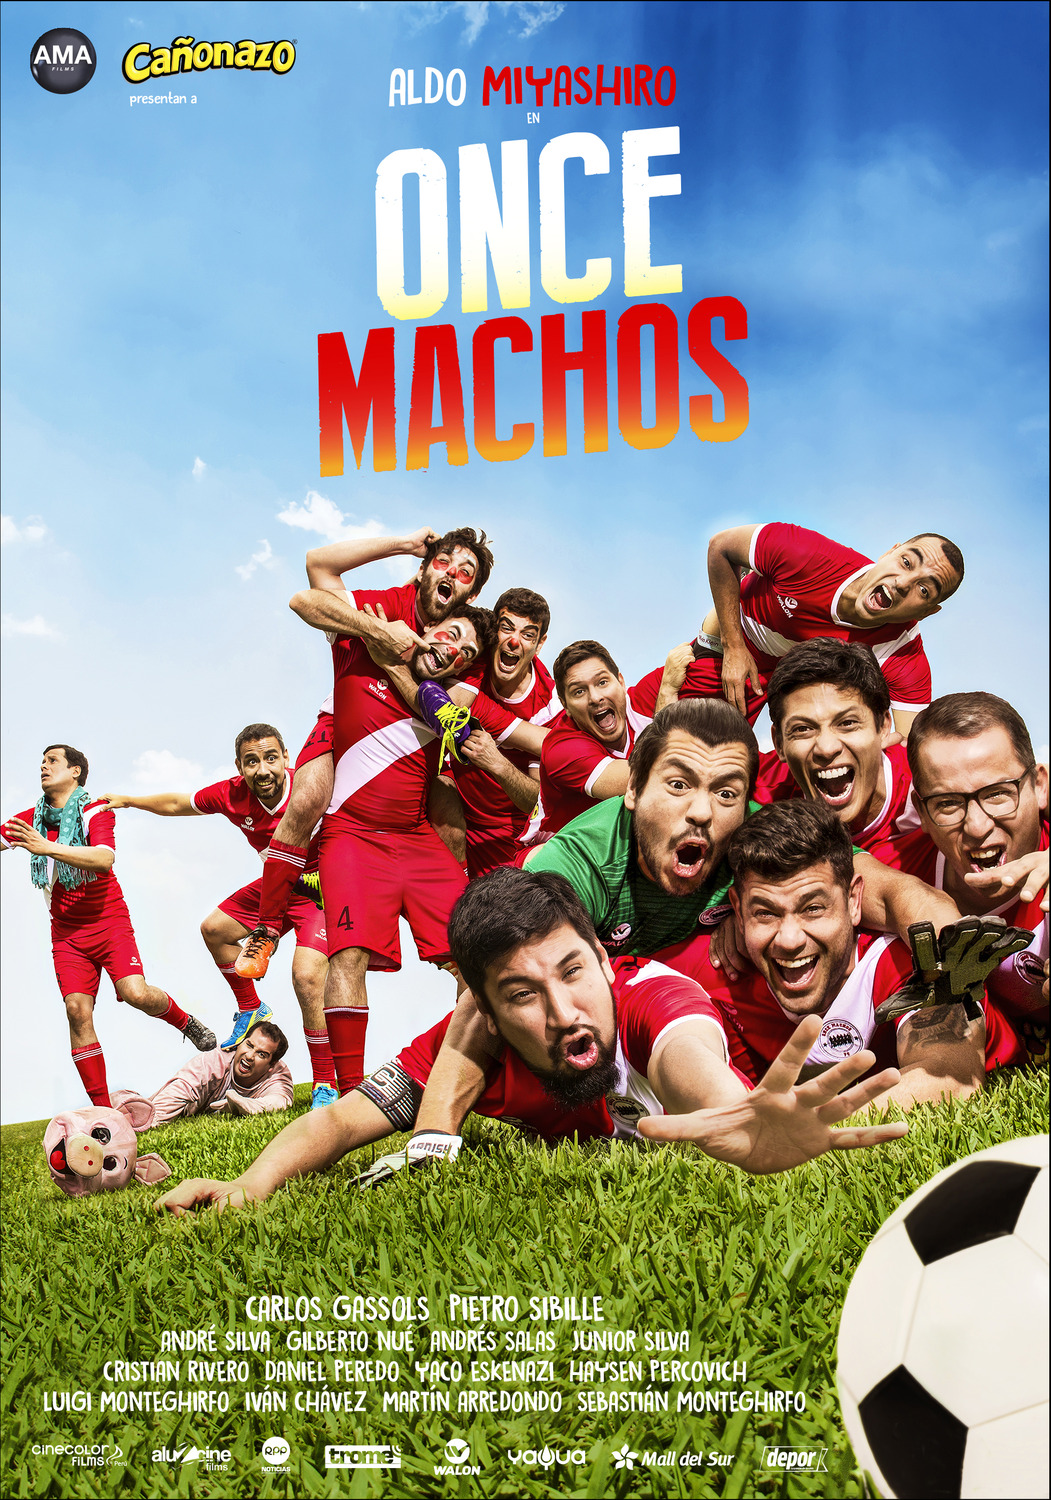 Extra Large Movie Poster Image for Once Machos 